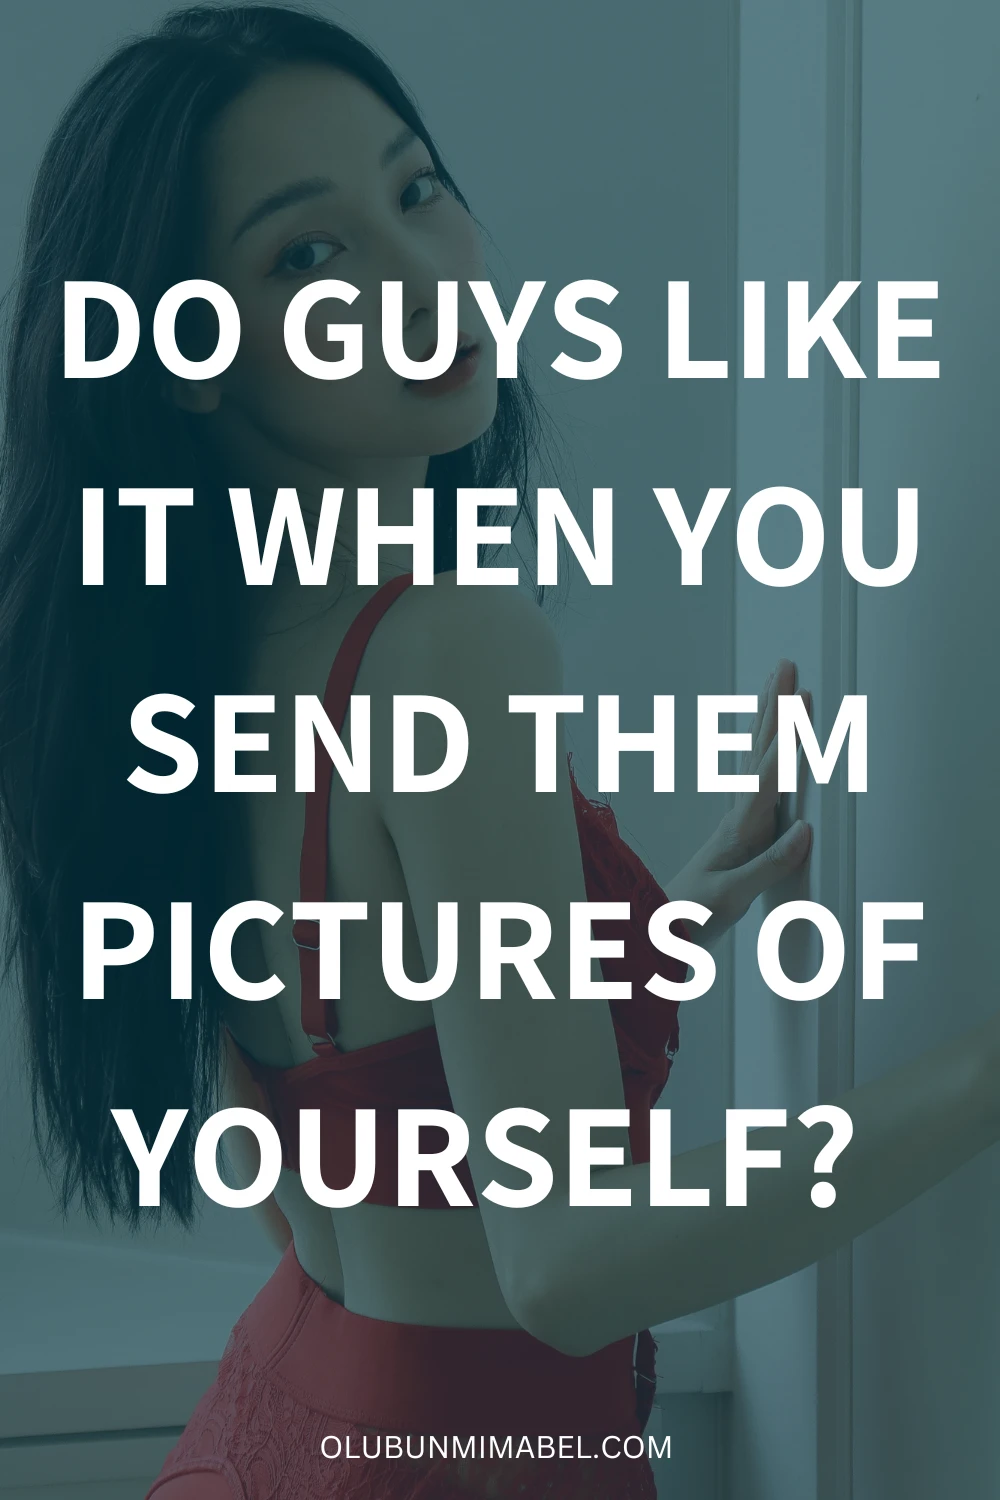 Do Guys Like When You Send Them Pictures of Yourself? 